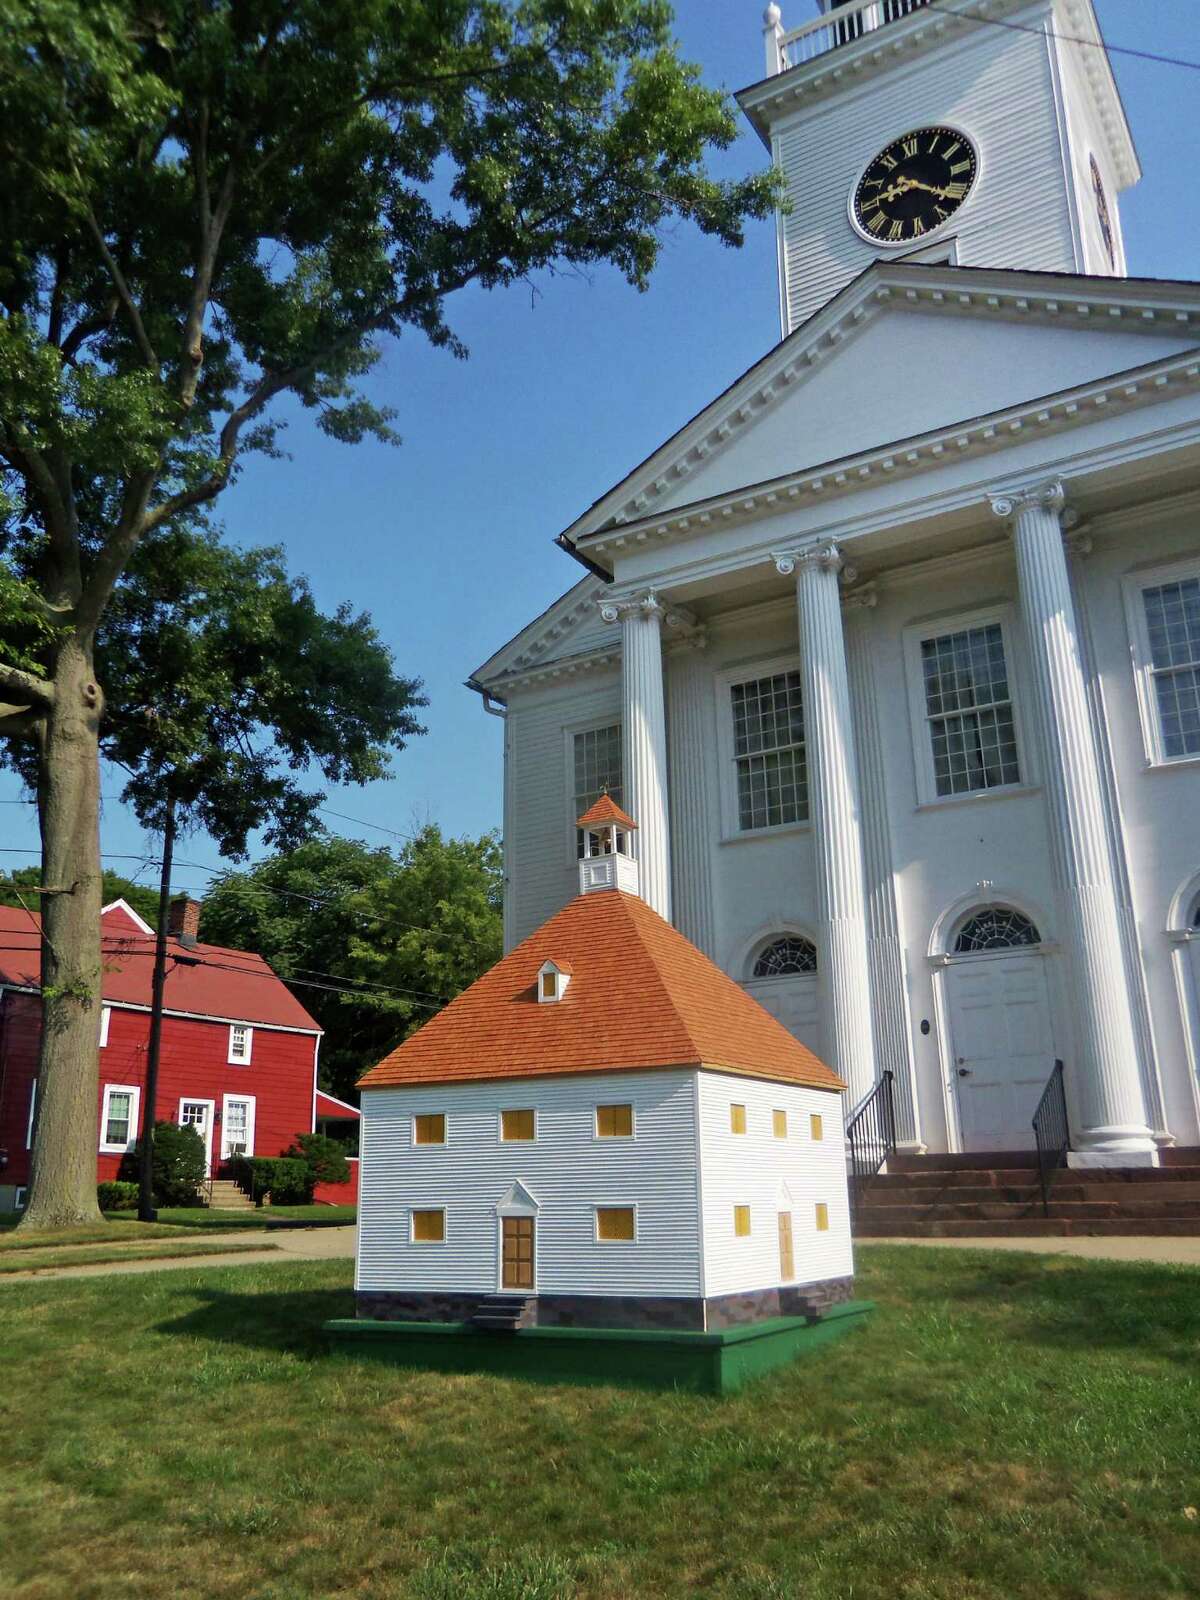 Milford's 1st Congregational Church is looking for a permanent home for its miniature reproduction of its first building, the 1639 First Meetinghouse. They're hoping that the city will come through with a location.